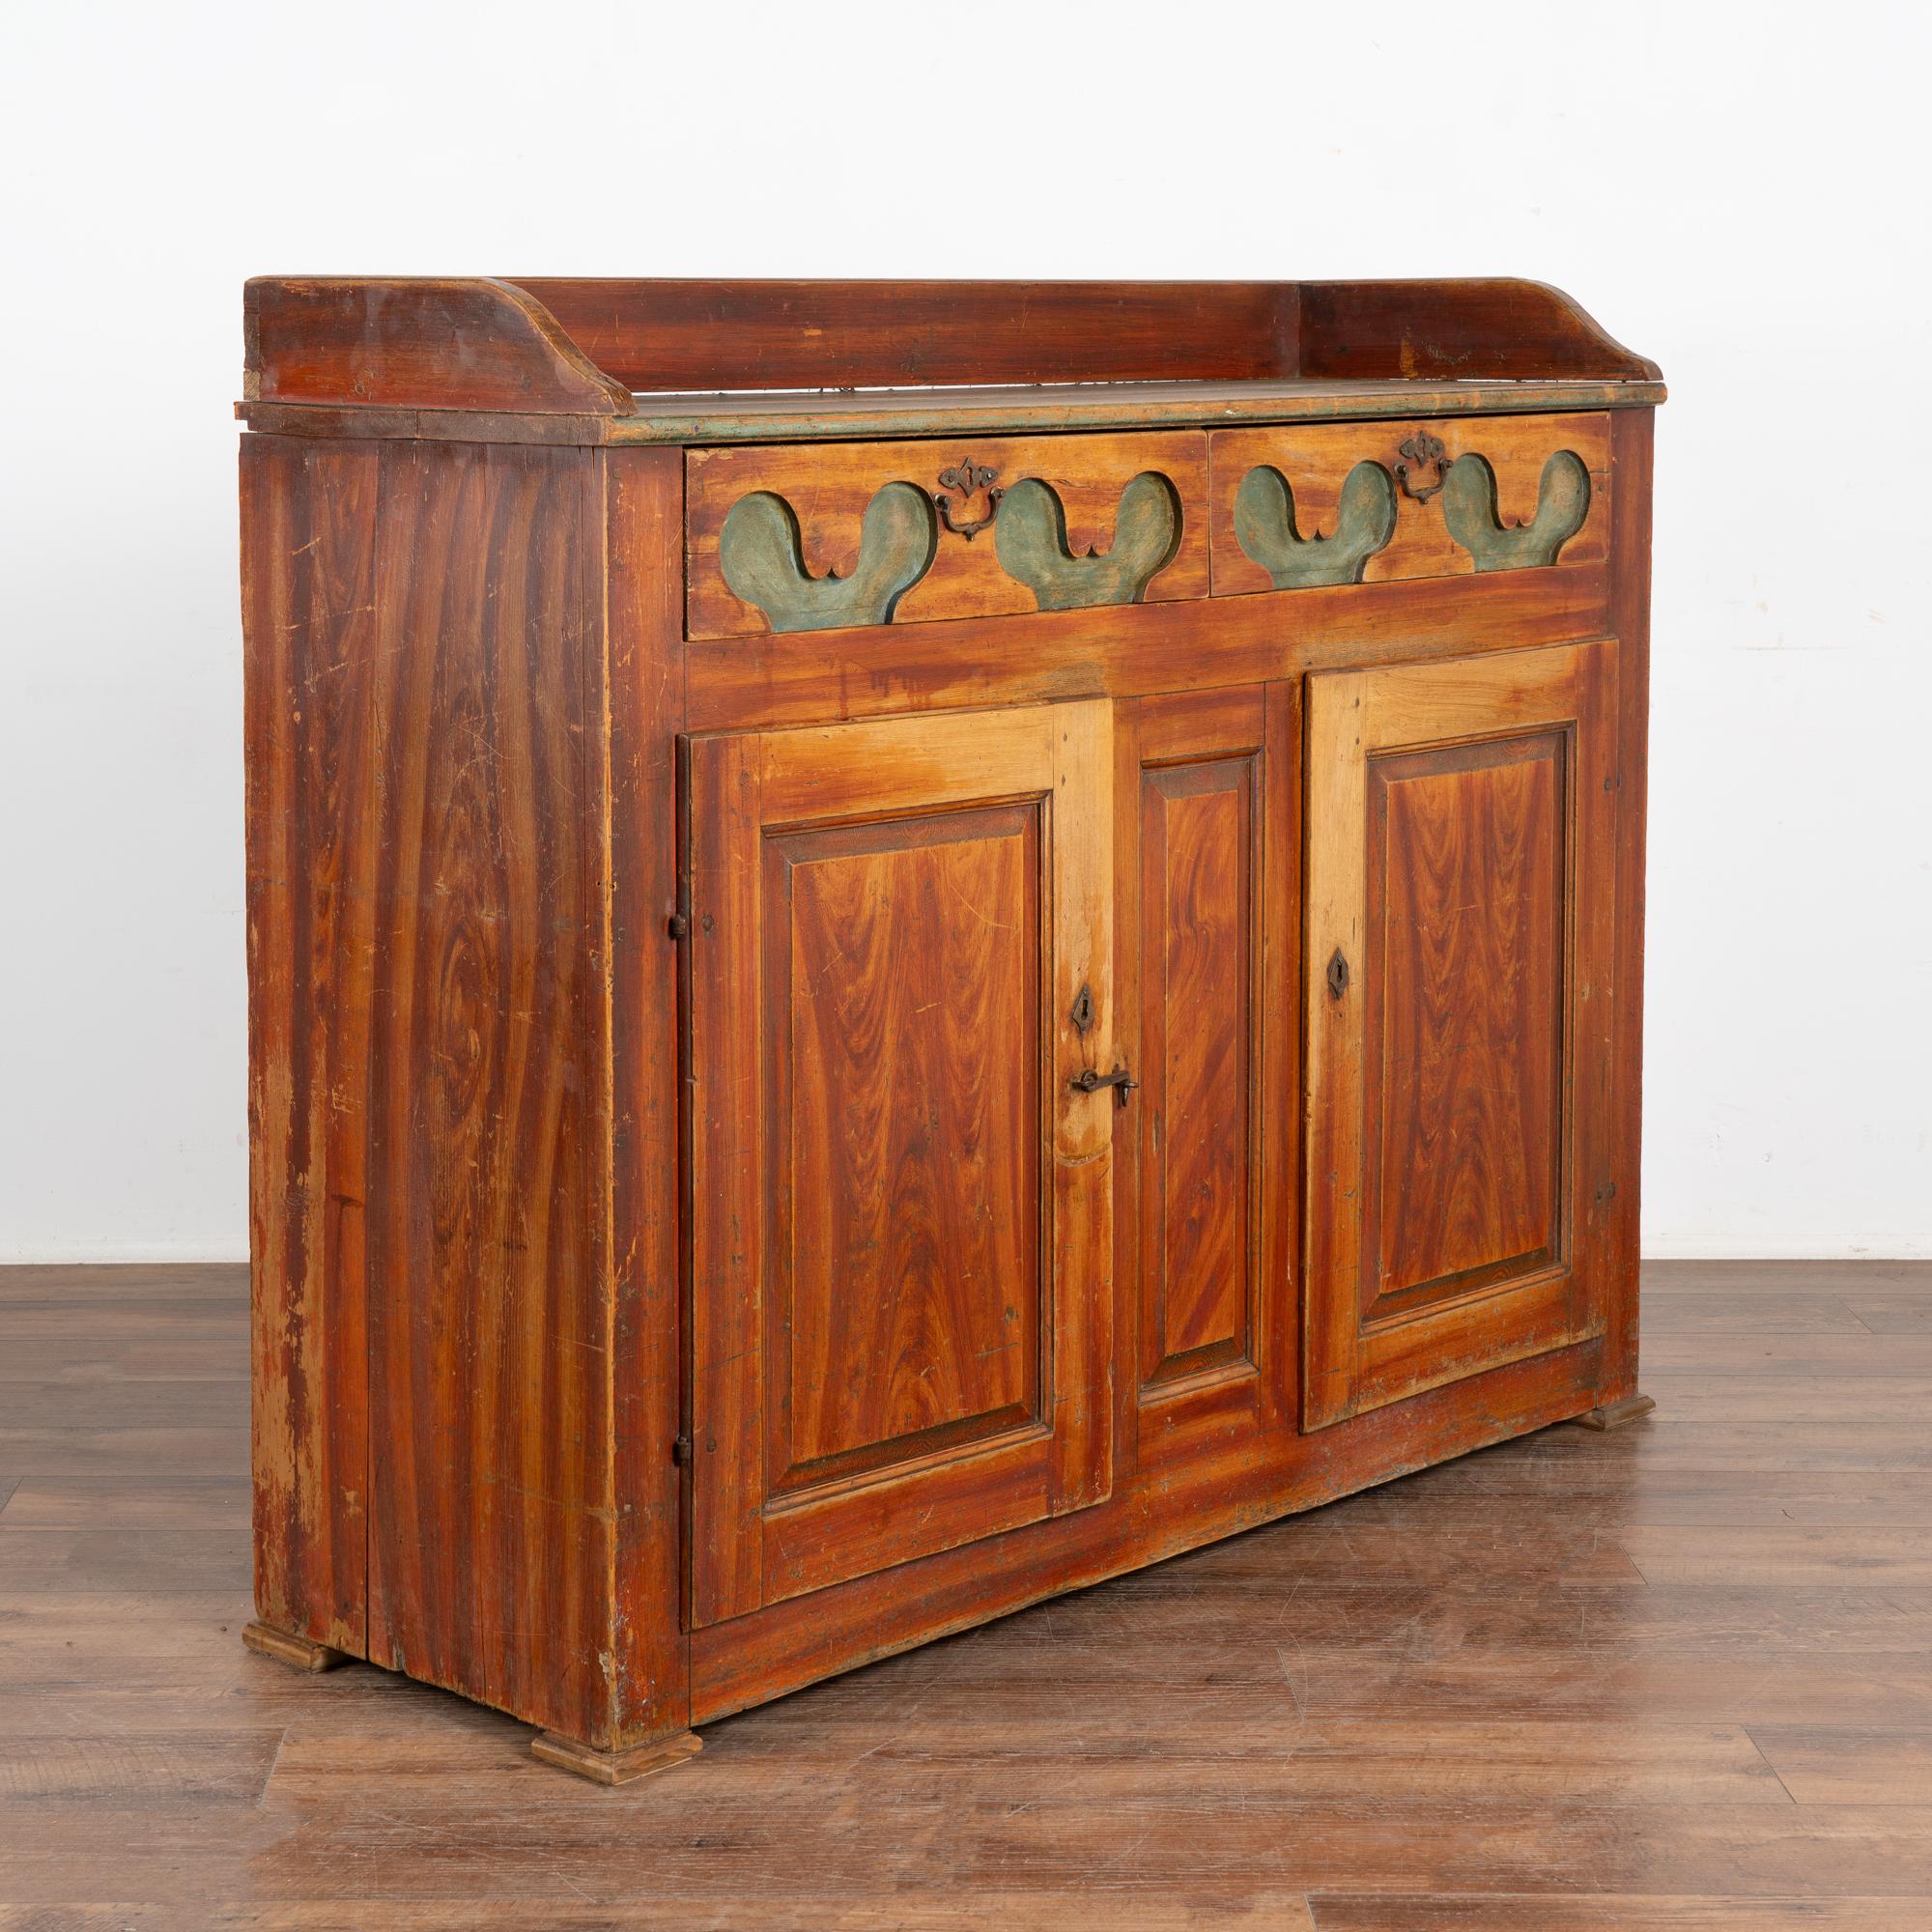 This pine sideboard is a wonderful example of Swedish country craftsmanship with unique carving along the two drawers.
The faux wood painted background was the folk art style of the period. The drawers and buffet top are painted in a contrasting